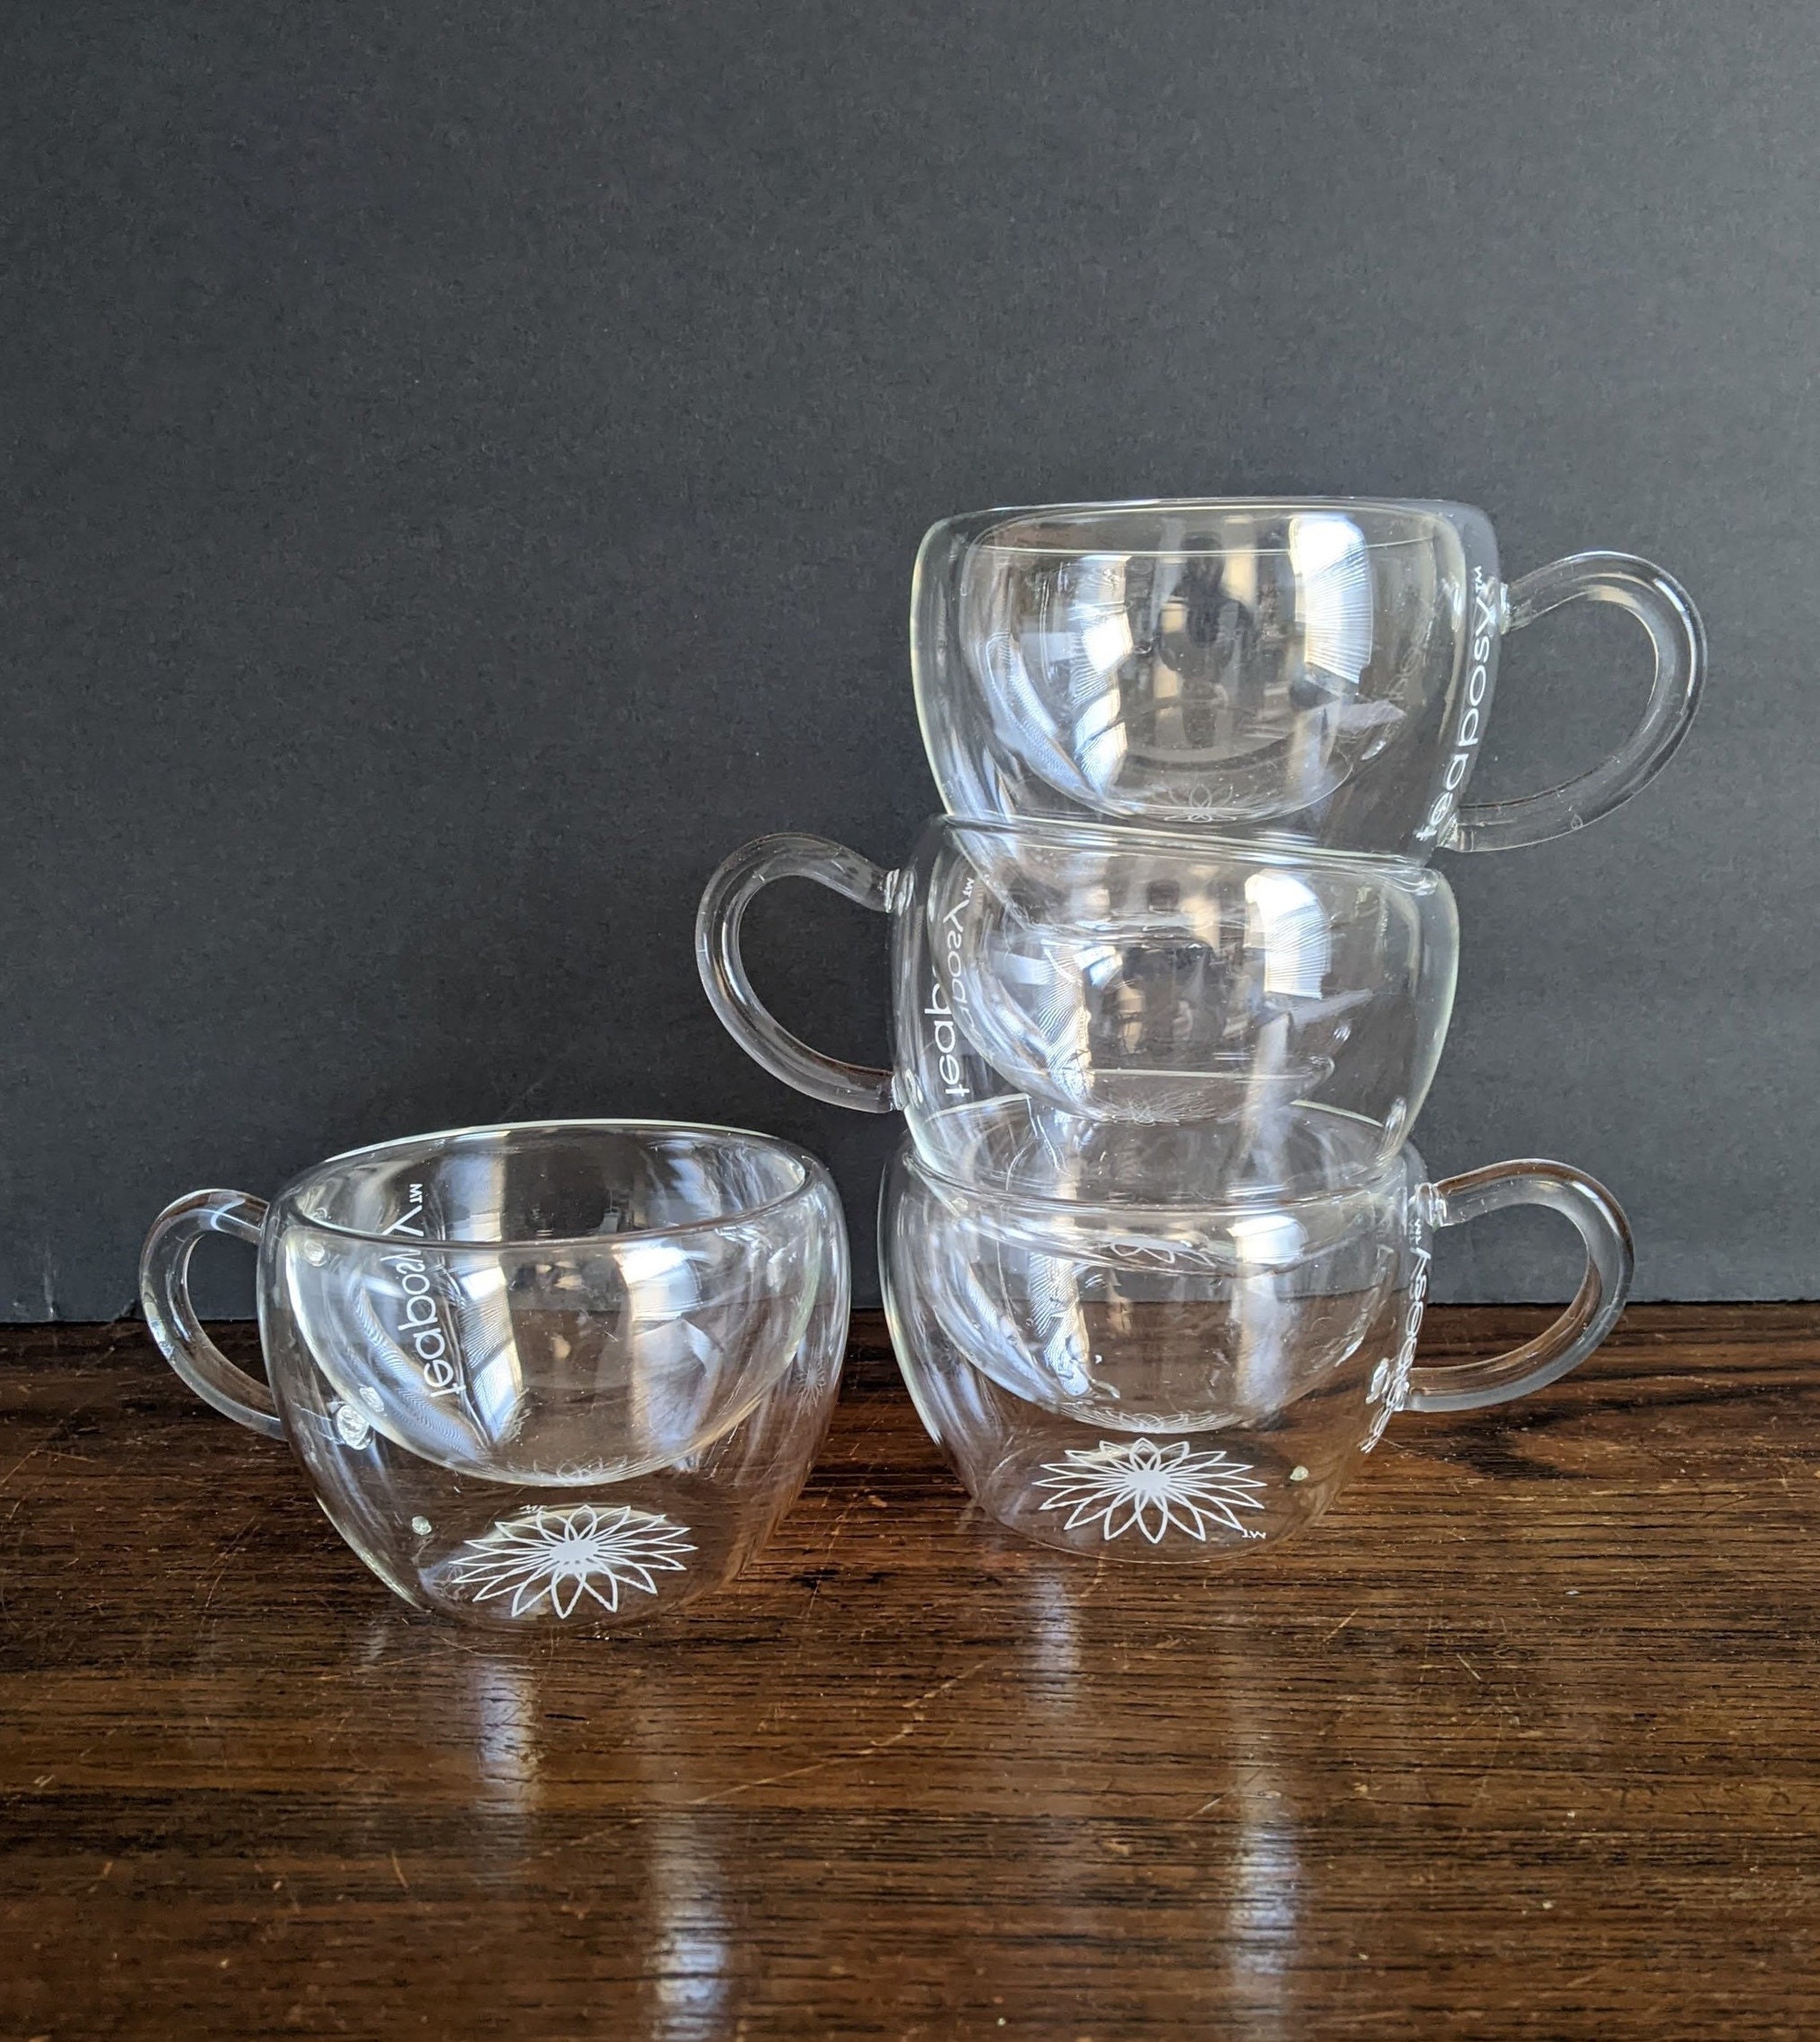 Shimmer - Borosilicate Glass Double Walled Teacups